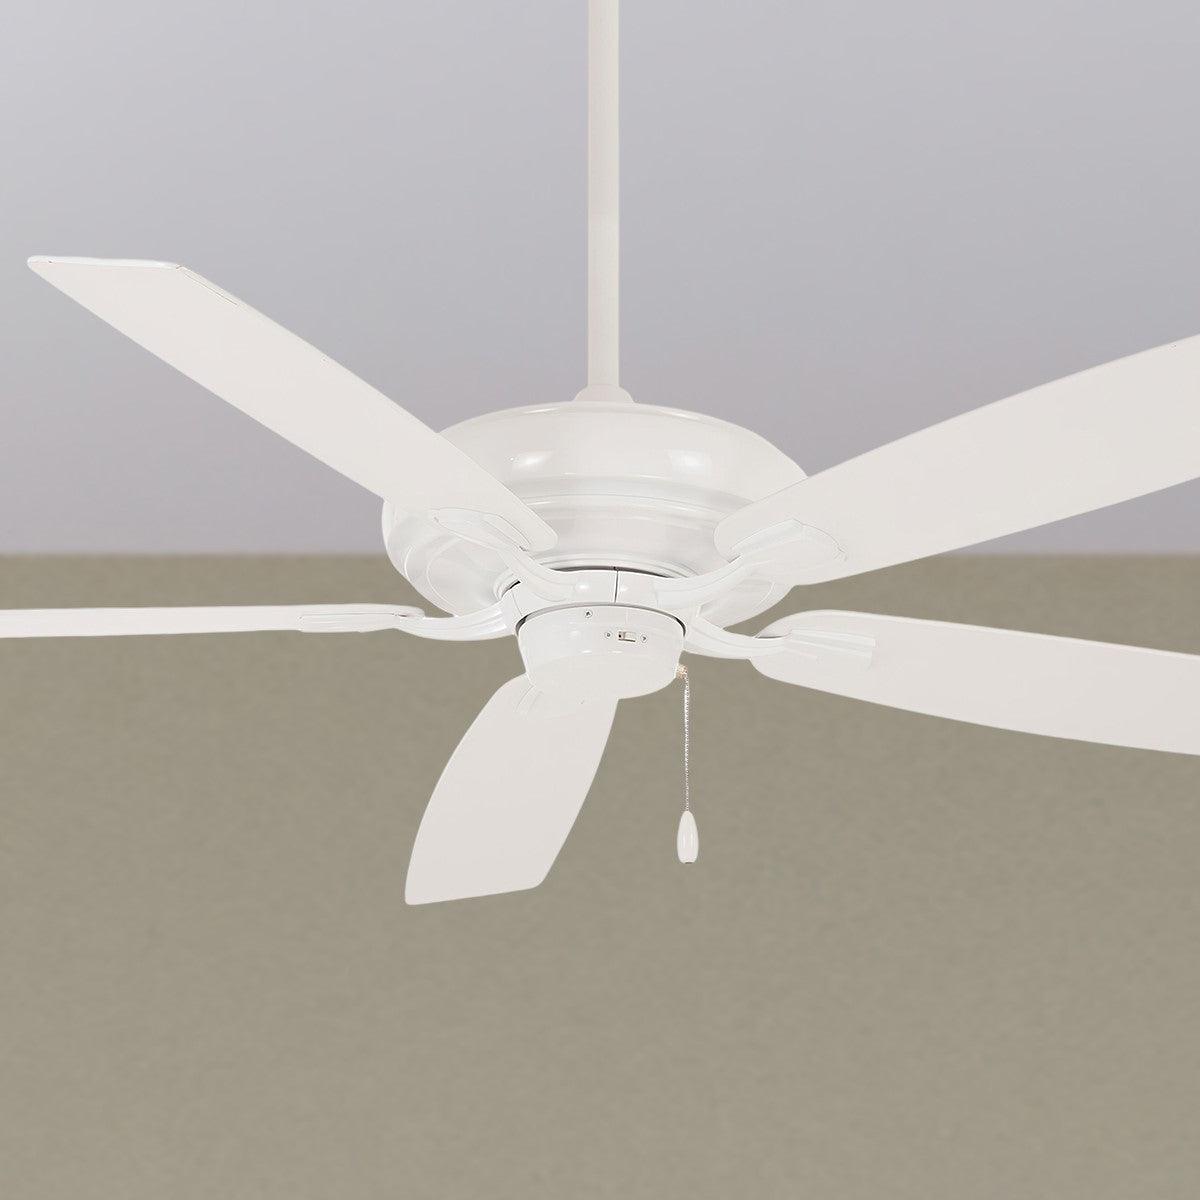 Watt 60 Inch Ceiling Fan With Pull Chain - Bees Lighting